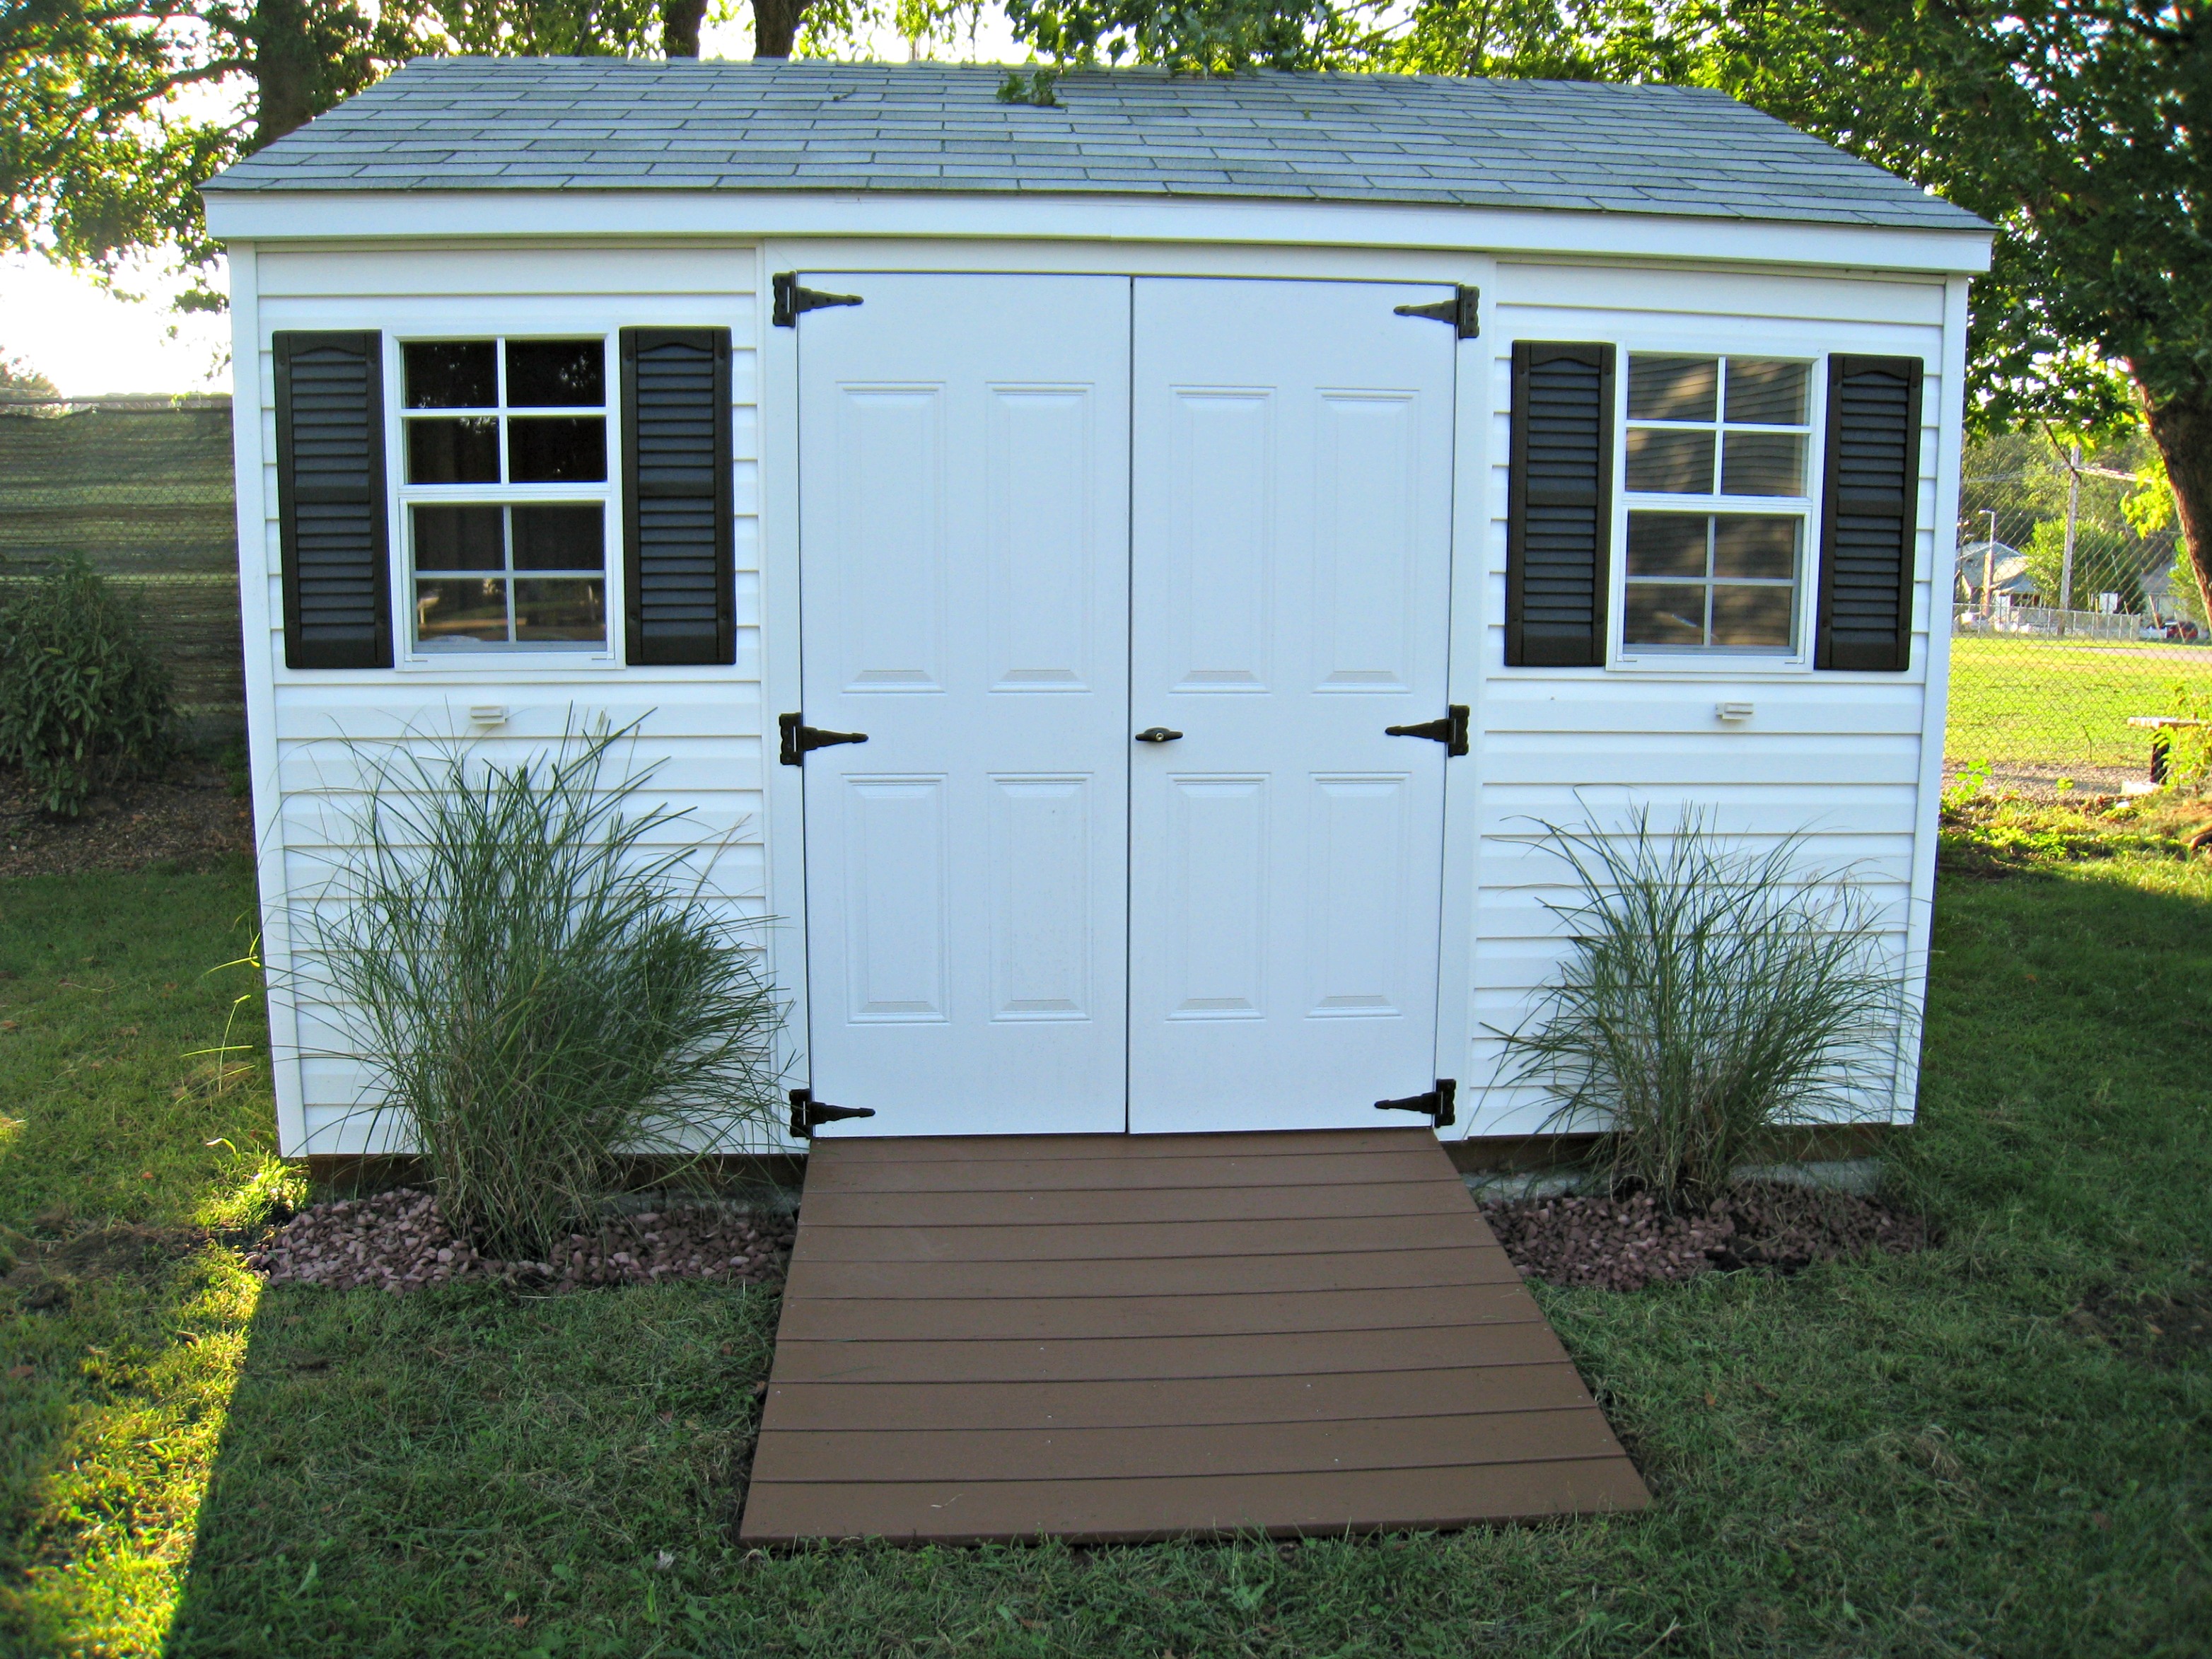 Sprucing Up a Storage Shed - momhomeguide.com